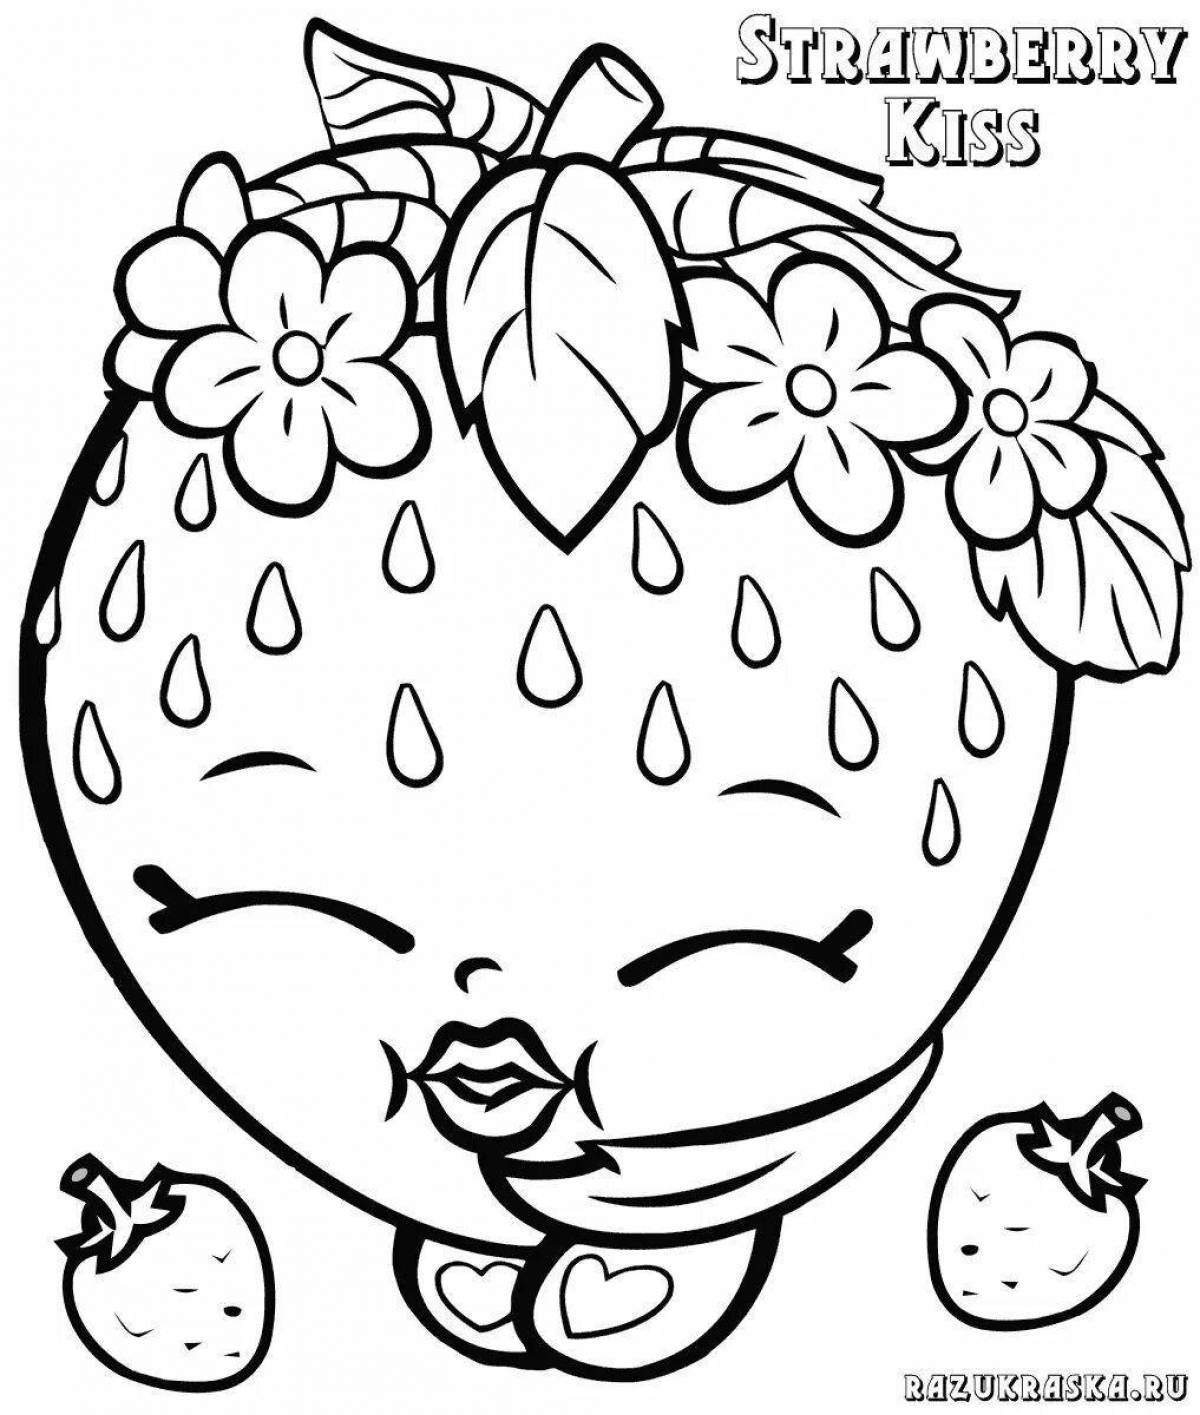 Cute strawberry coloring book for girls